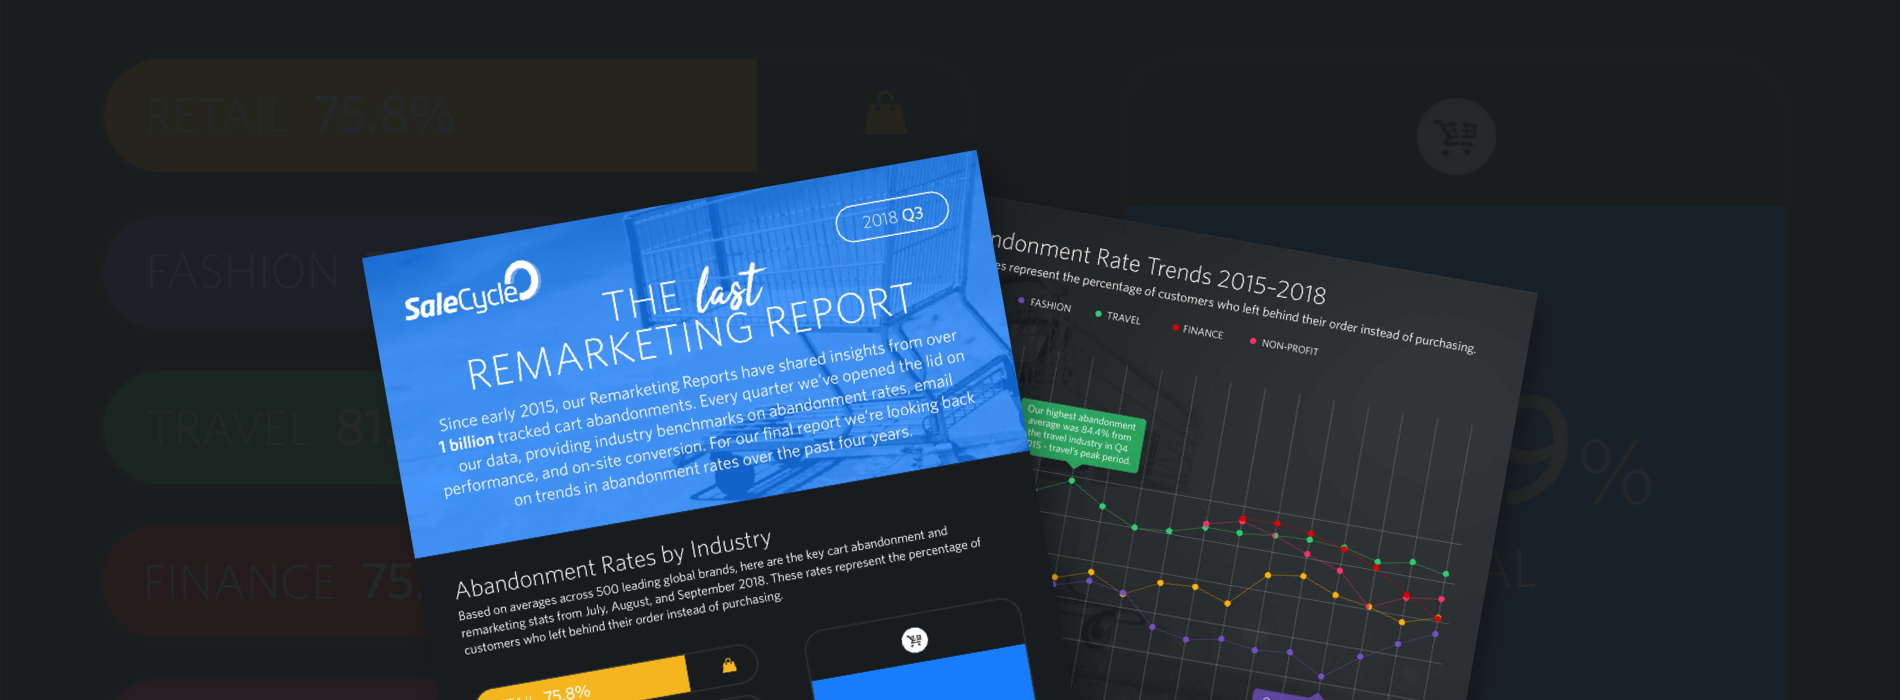 [Infographic] The Remarketing Report – Q3 2018